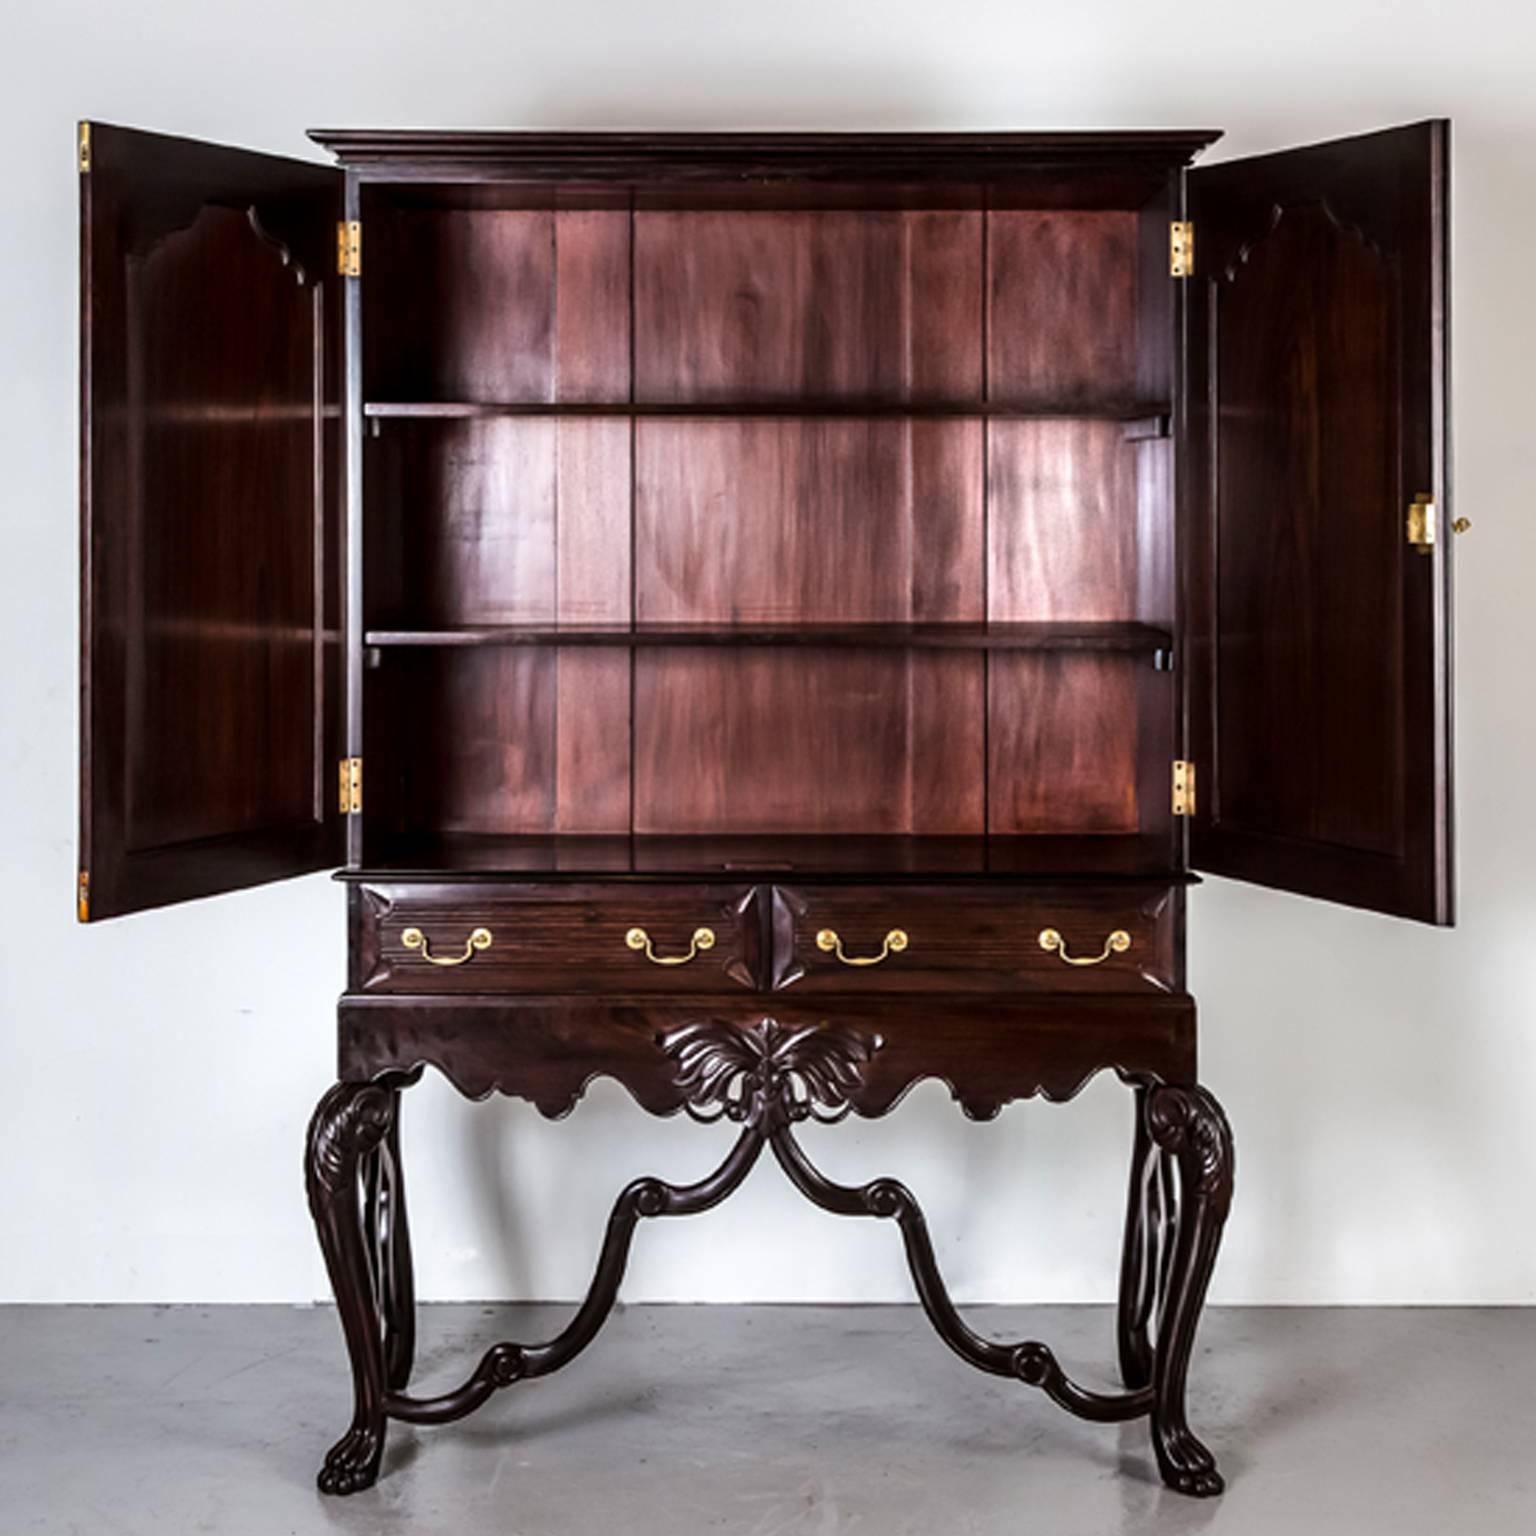 A magnificent Portuguese colonial rosewood cupboard on stand with an overhanging rectangular top. 
The double doors are crafted with an arched cushion moulded panel and with a pattern exclusive to Portuguese India. The doors open to an interior